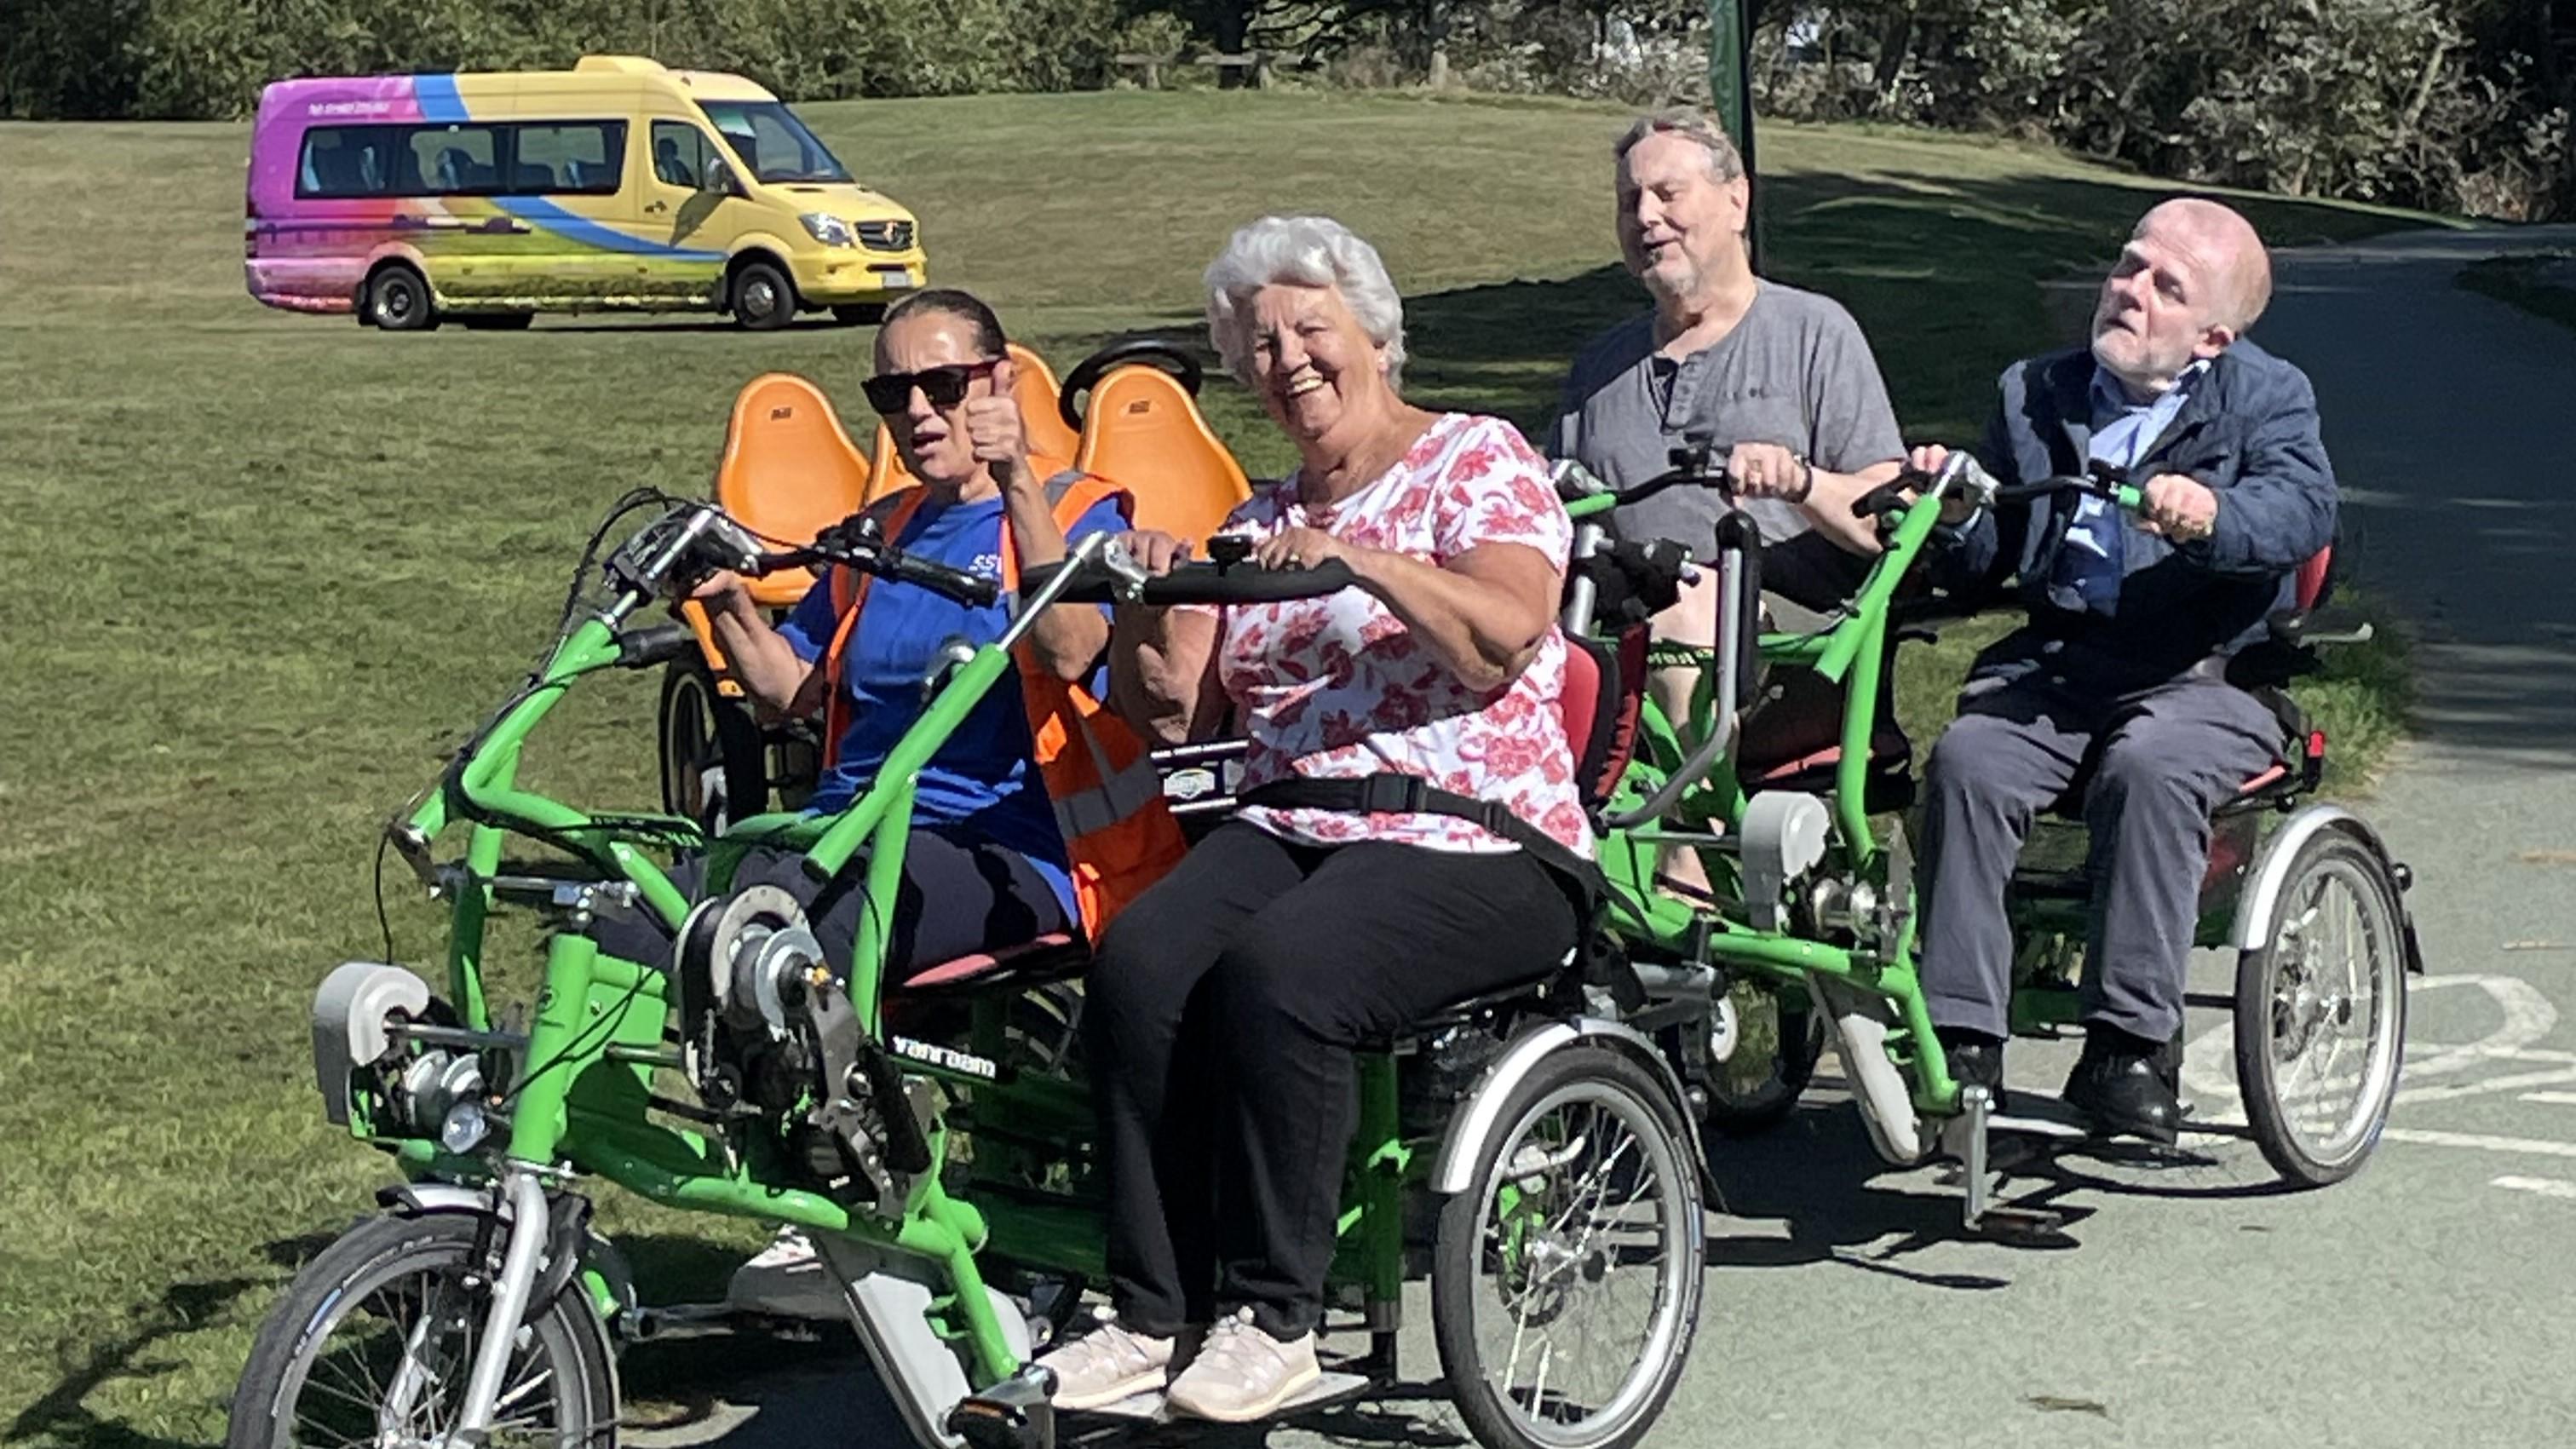 four ssw members riding on a four seater trike and trailer. The ssw minibus is parked on the field in the background